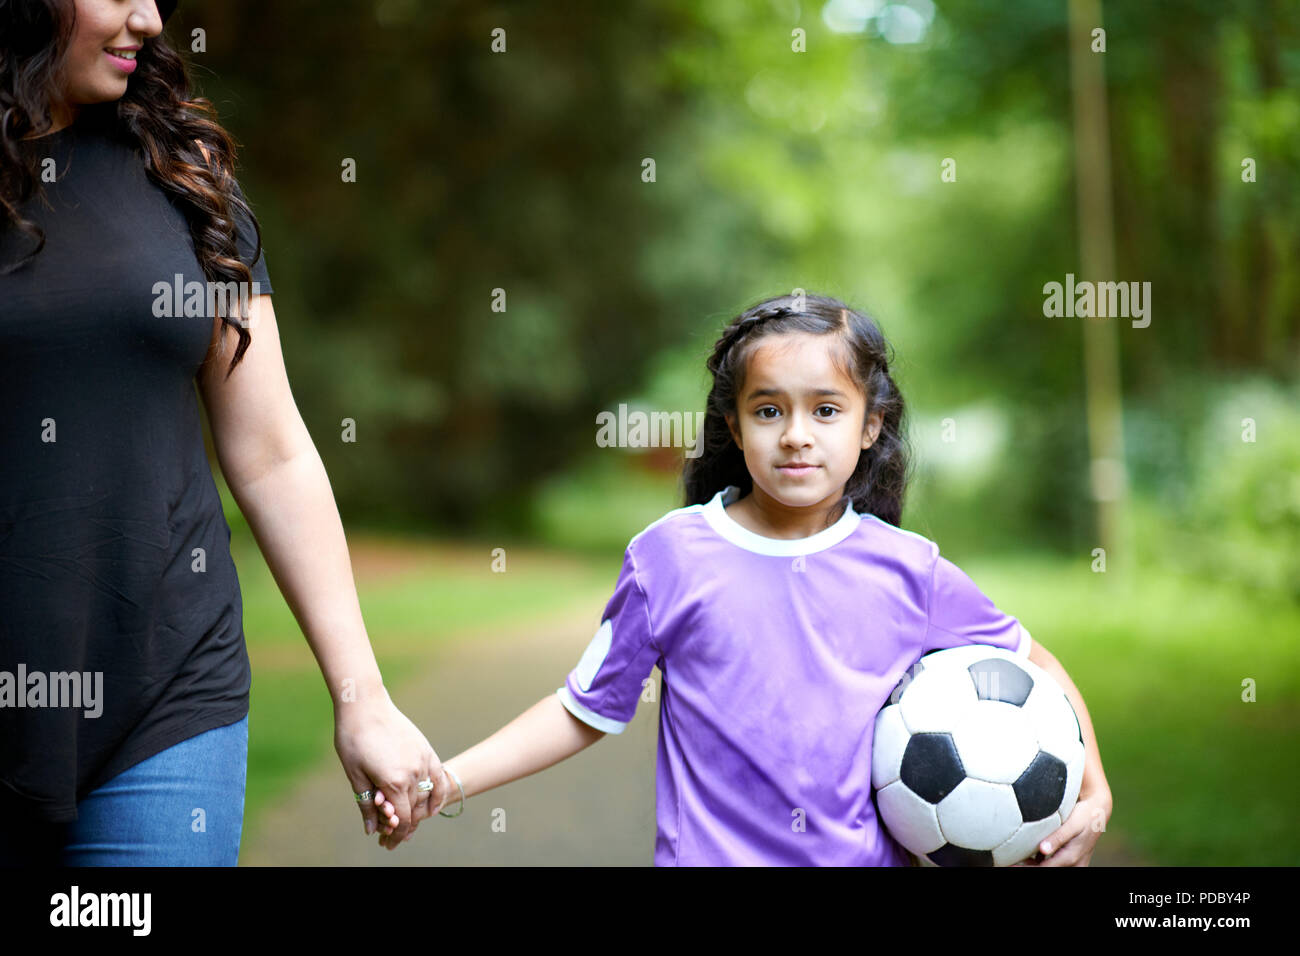 Portrait girl with soccer ball holding hands with mother Stock Photo